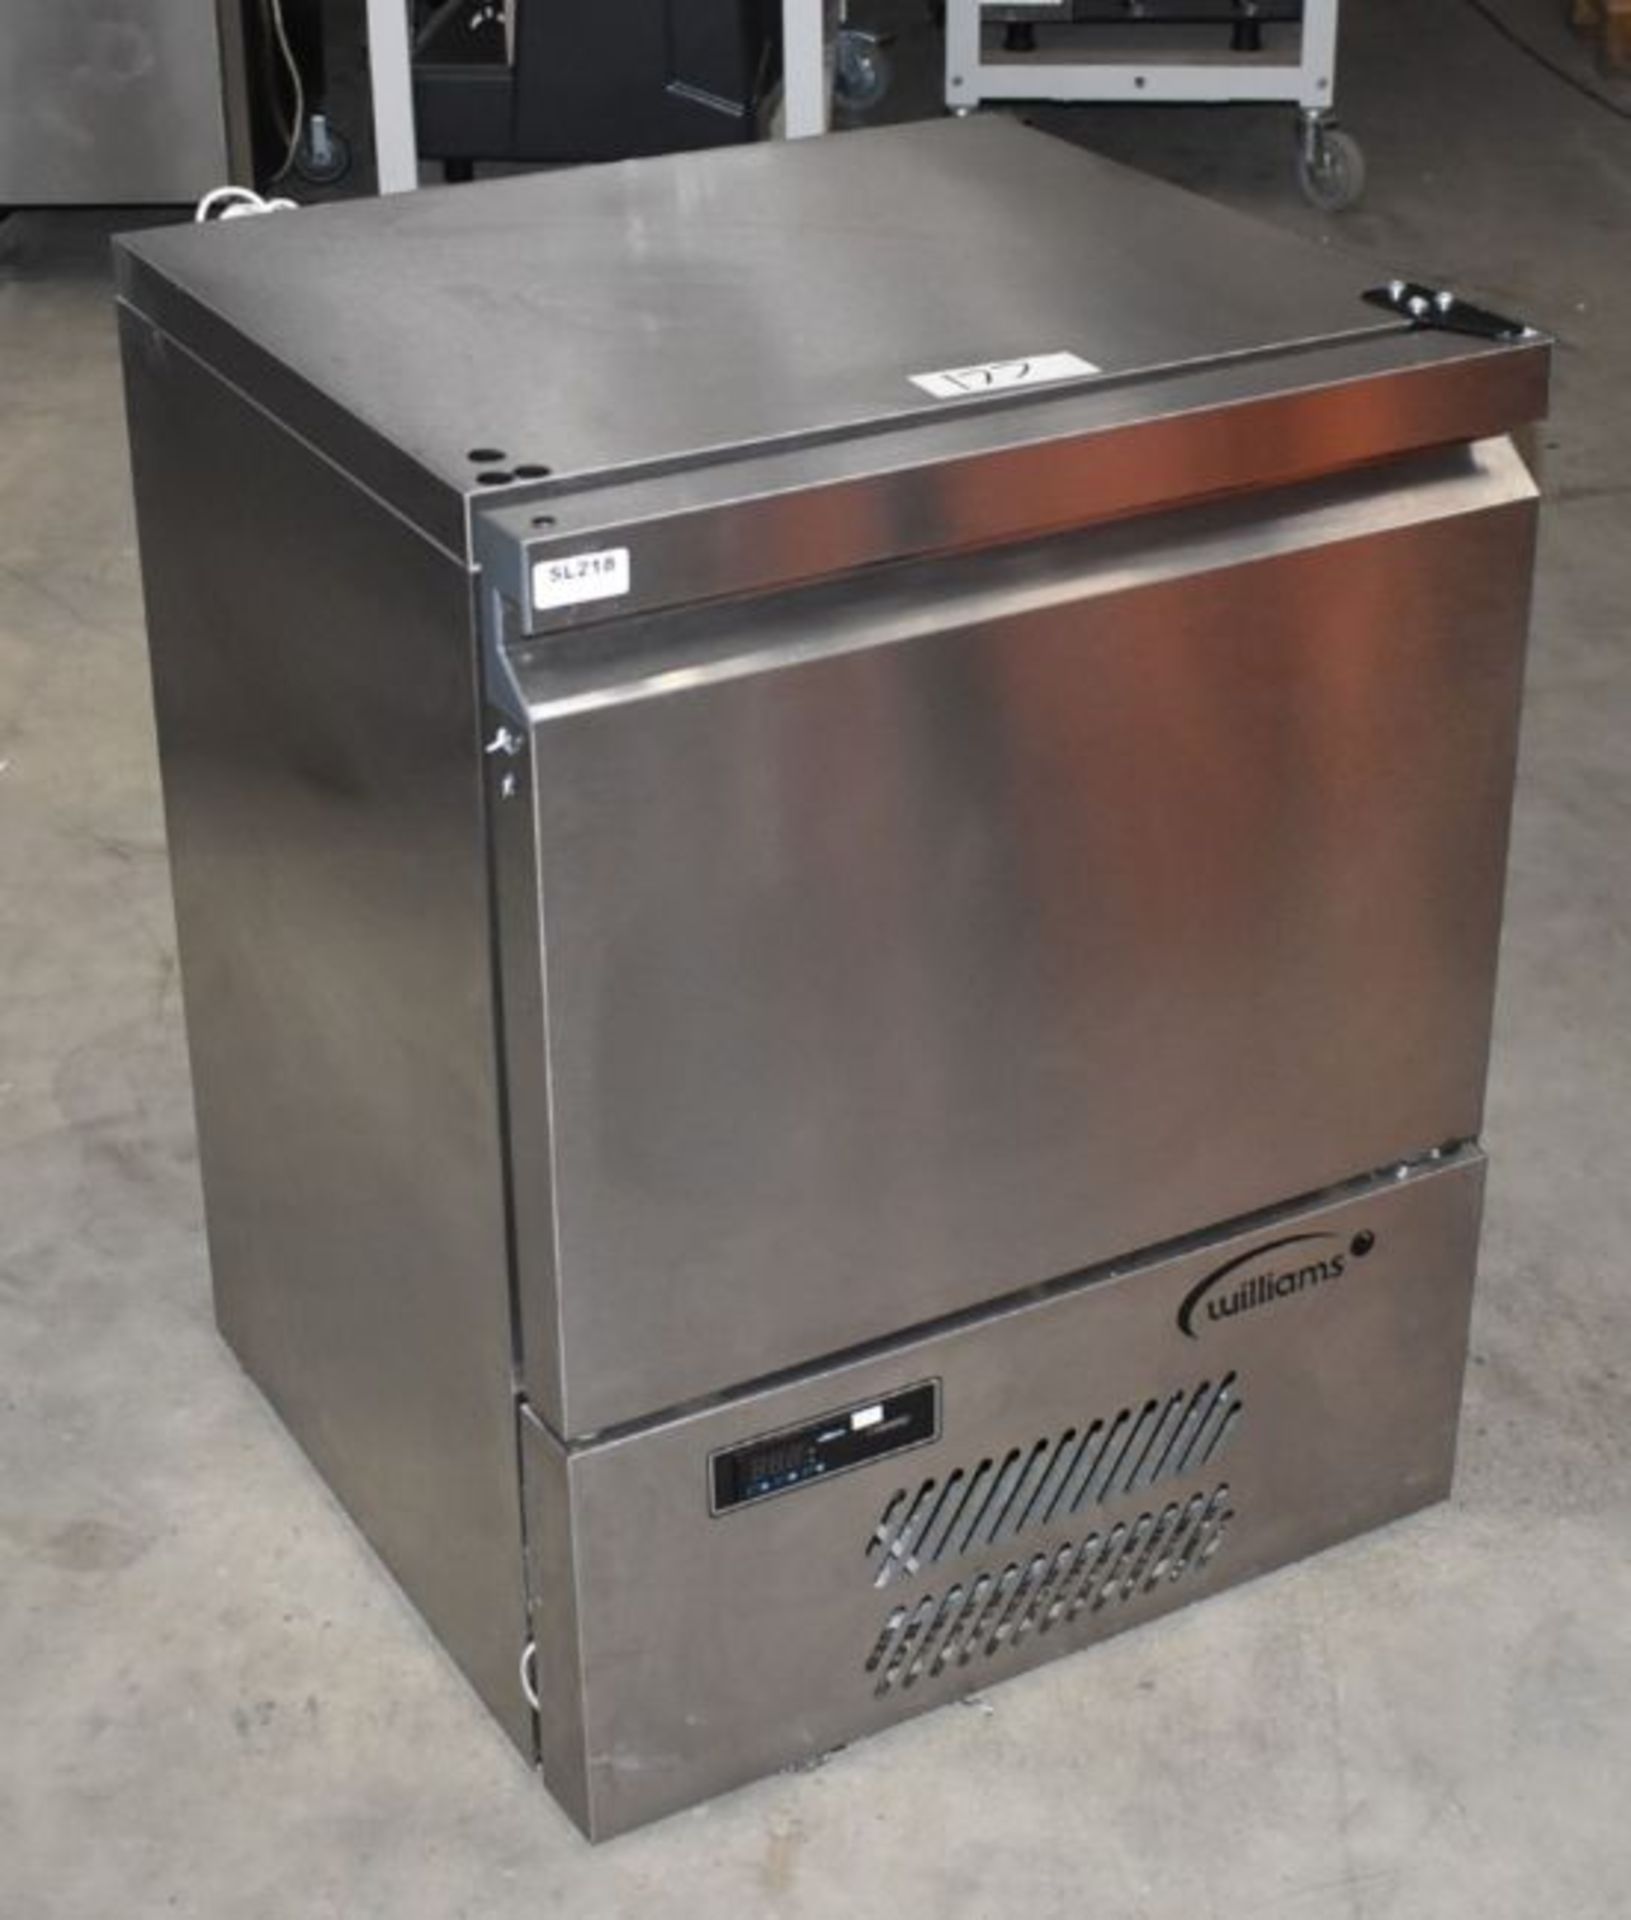 1 x Williams H5UC R290 R1 Single Door Stainless Steel Undercounter Fridge With Easy Grab Handle - Image 4 of 4